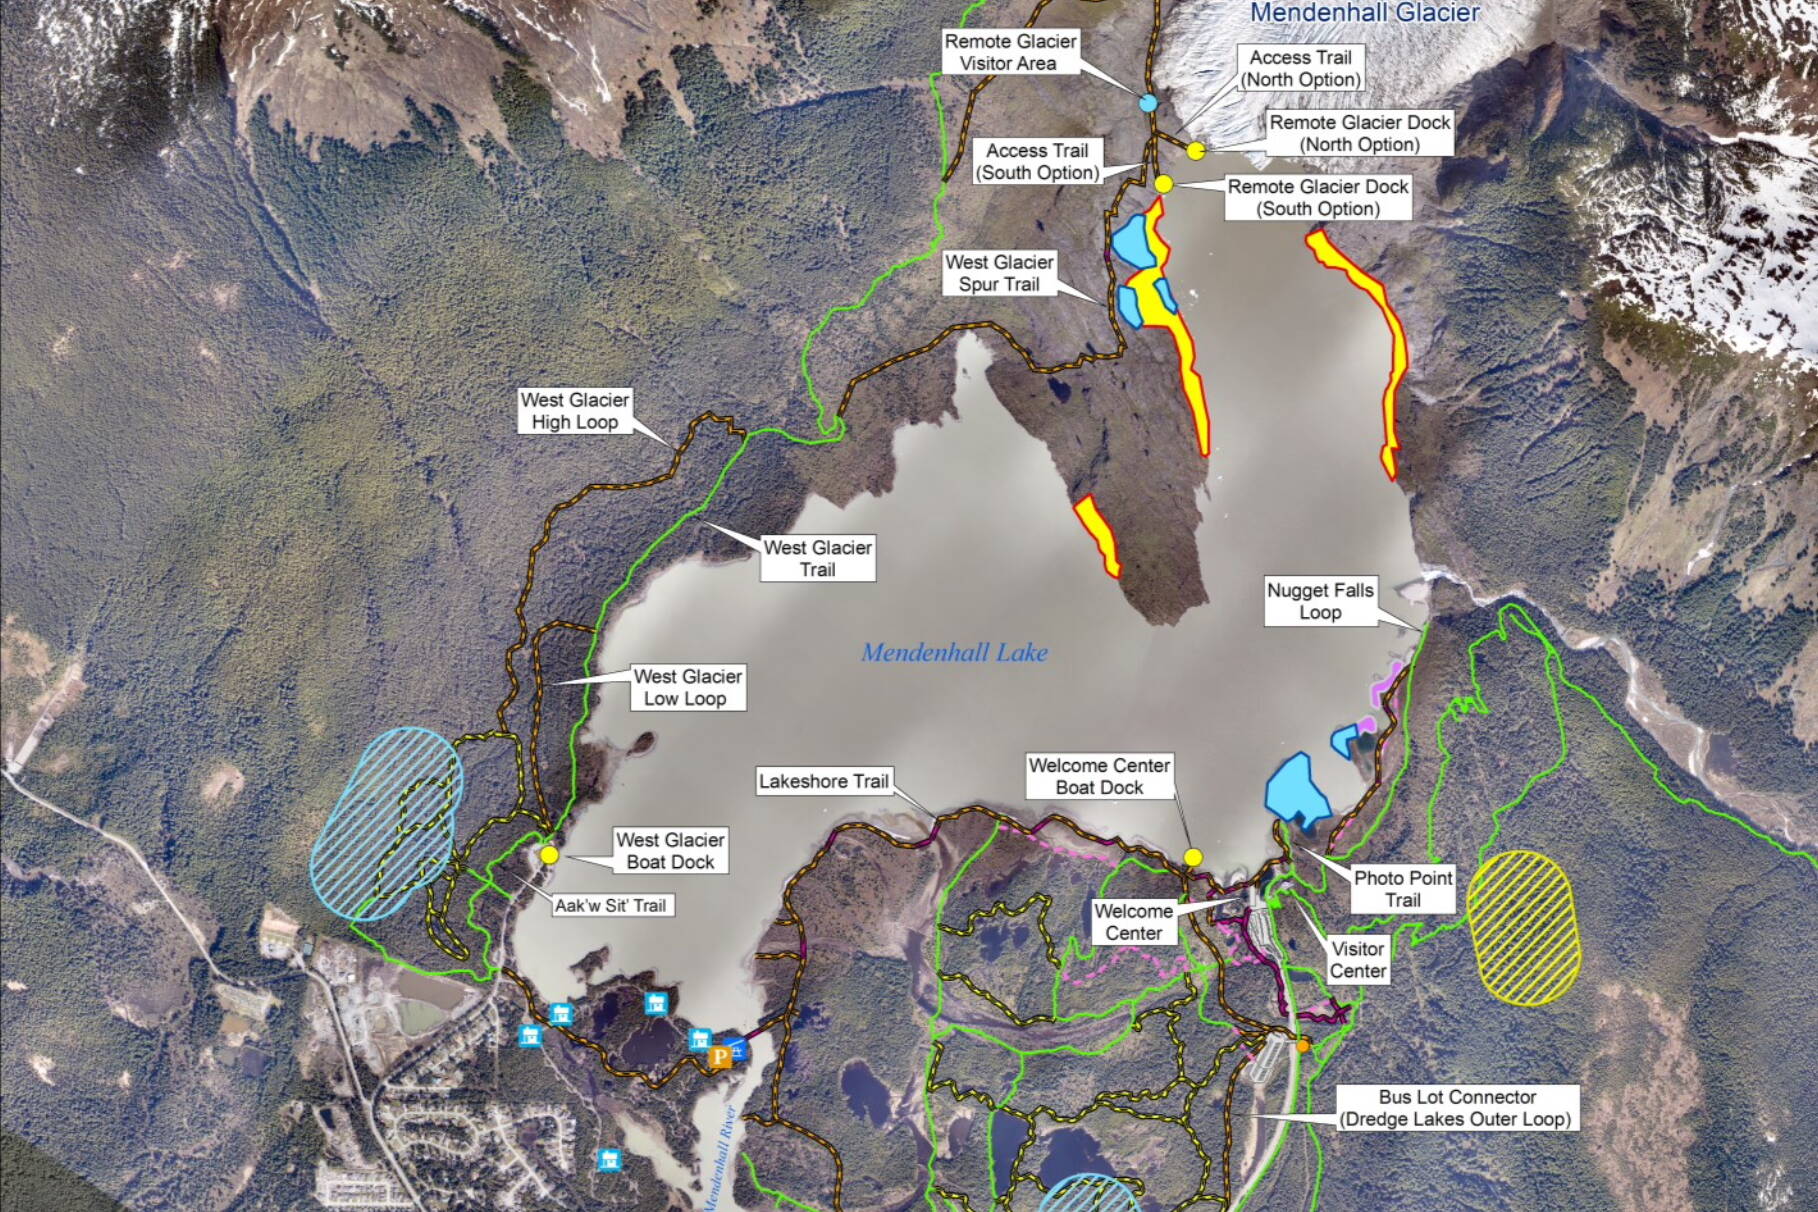 A map showing Alternative 2, the most aggressive of four original options for expanding the Mendenhall Glacier Recreational Area, includes a dock for commercial motor boats that would carry passengers to a new visitor area at the face of the Mendenhall Glacier. That alternative is the “proposed action” by the U.S. Forest Service, but a revised draft Environmental Impact Statement scheduled to be released Tuesday adds three new lower-impact alternatives to three others already being considered. (U.S. Forest Service)